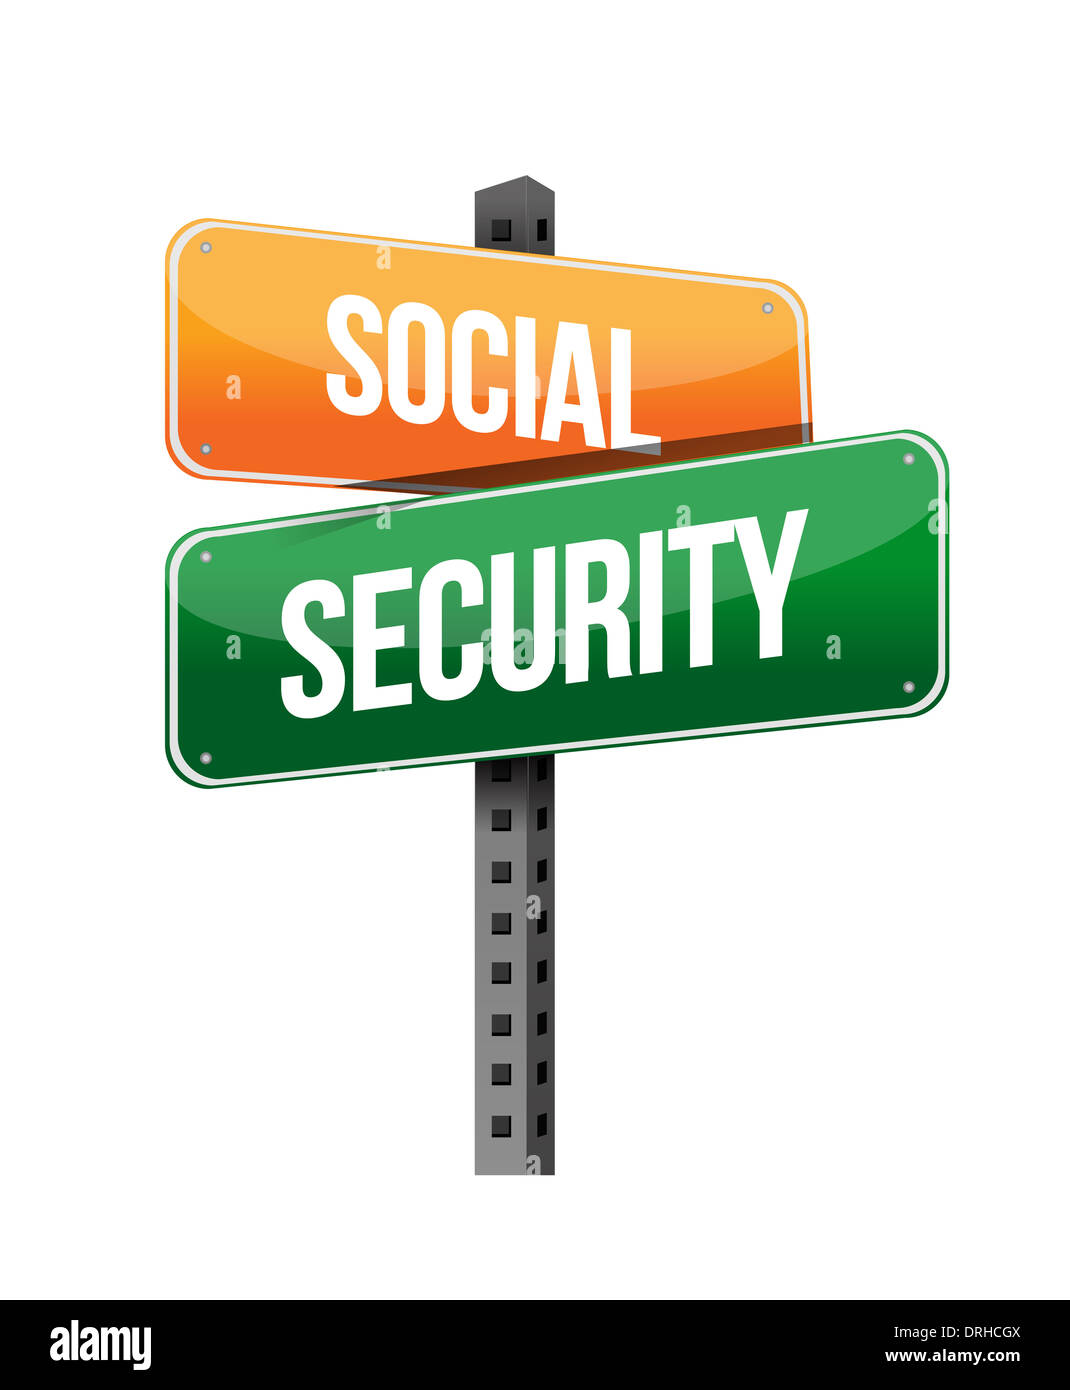 social security illustration design over a white background Stock Photo